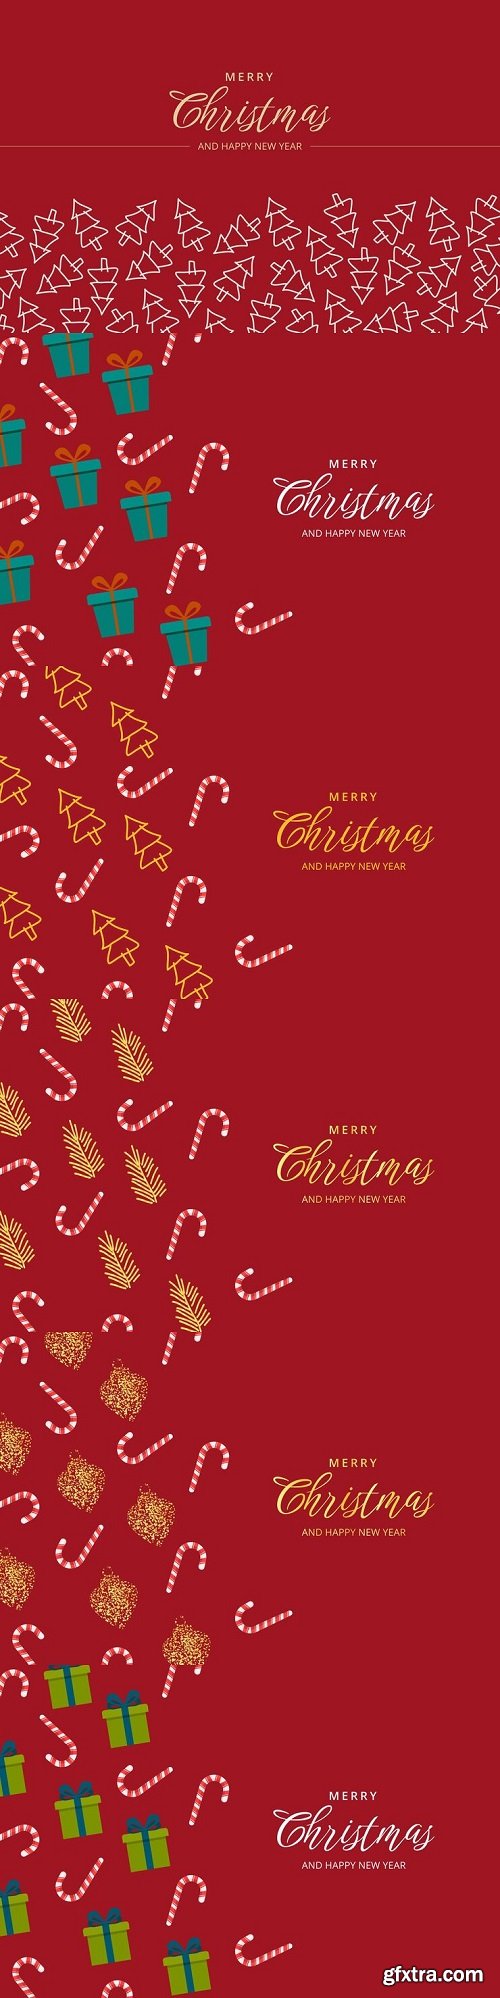 Cute design christmas background with christmas icons